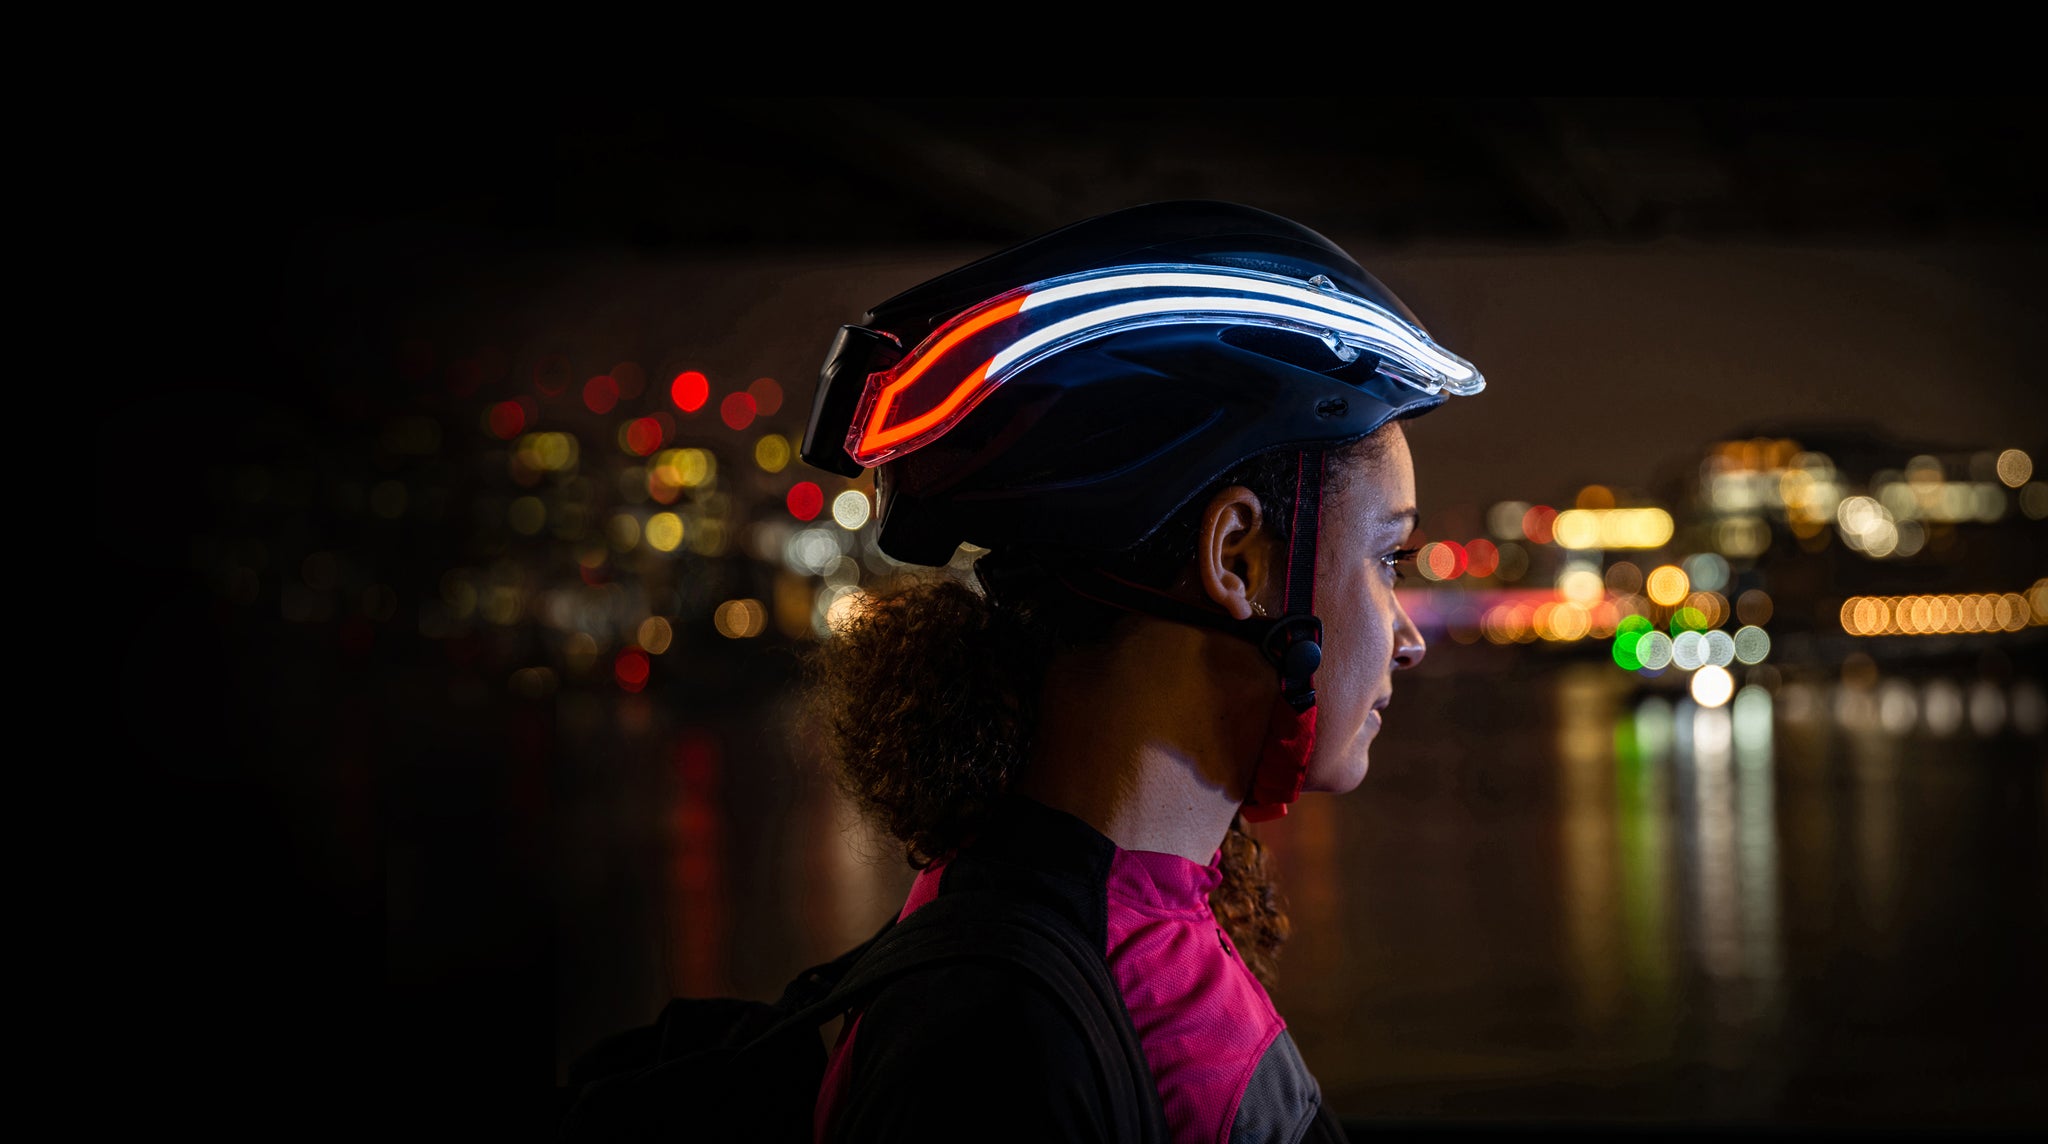 Profile image of female wearing Nightblazr helmet light in low light conditions. Showing 360º visibility